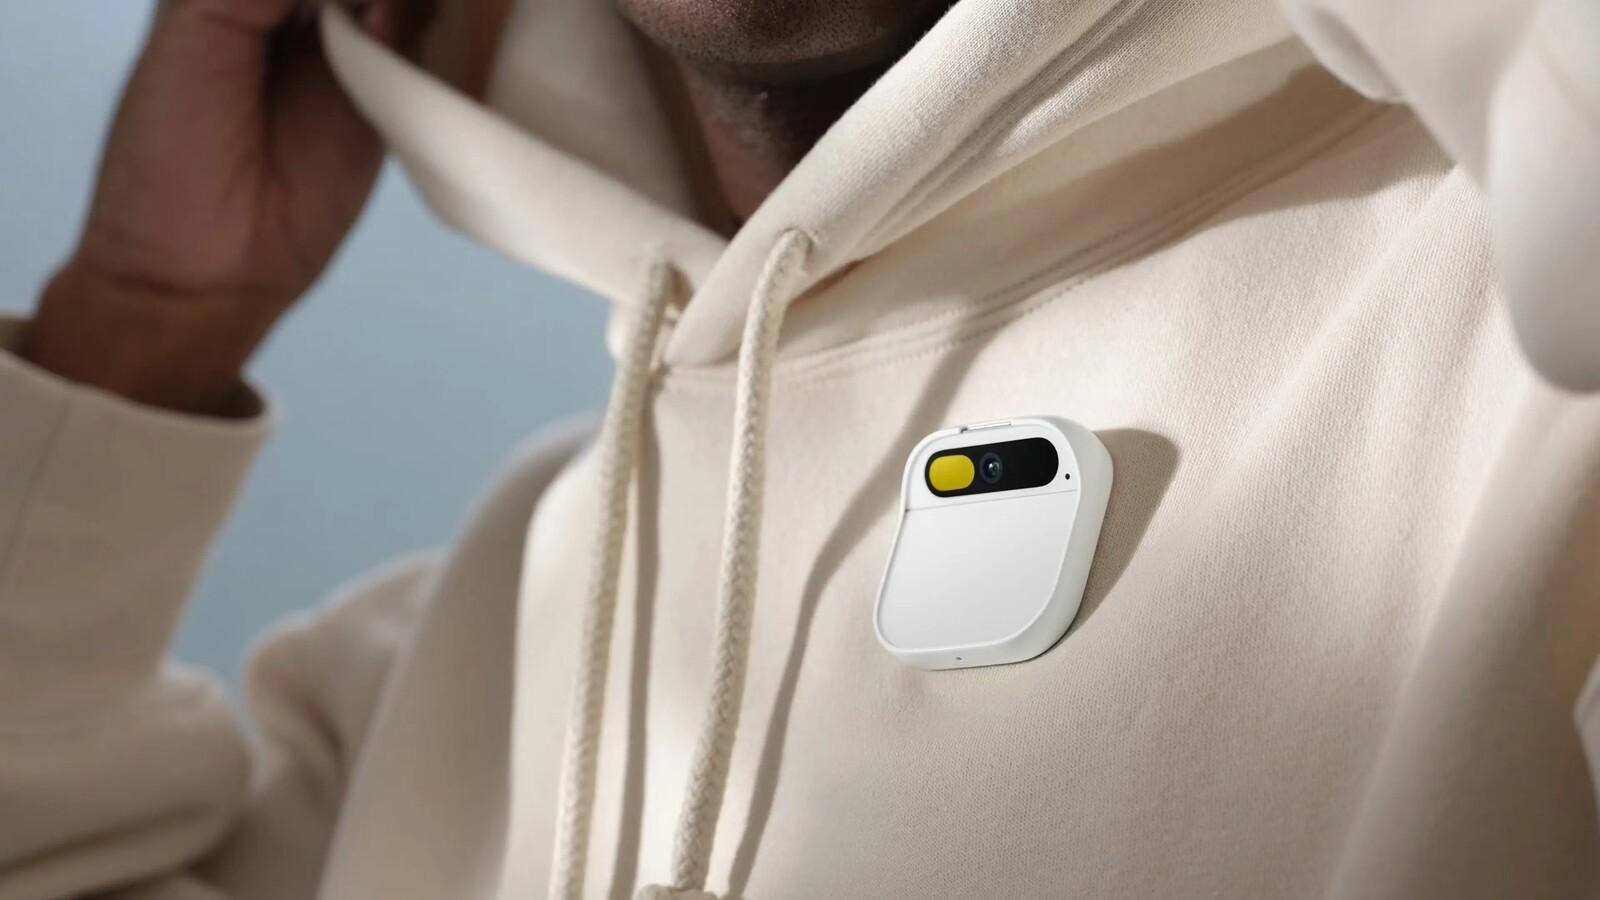 Image showing the Humane AI Pin attached to a user's jacket.